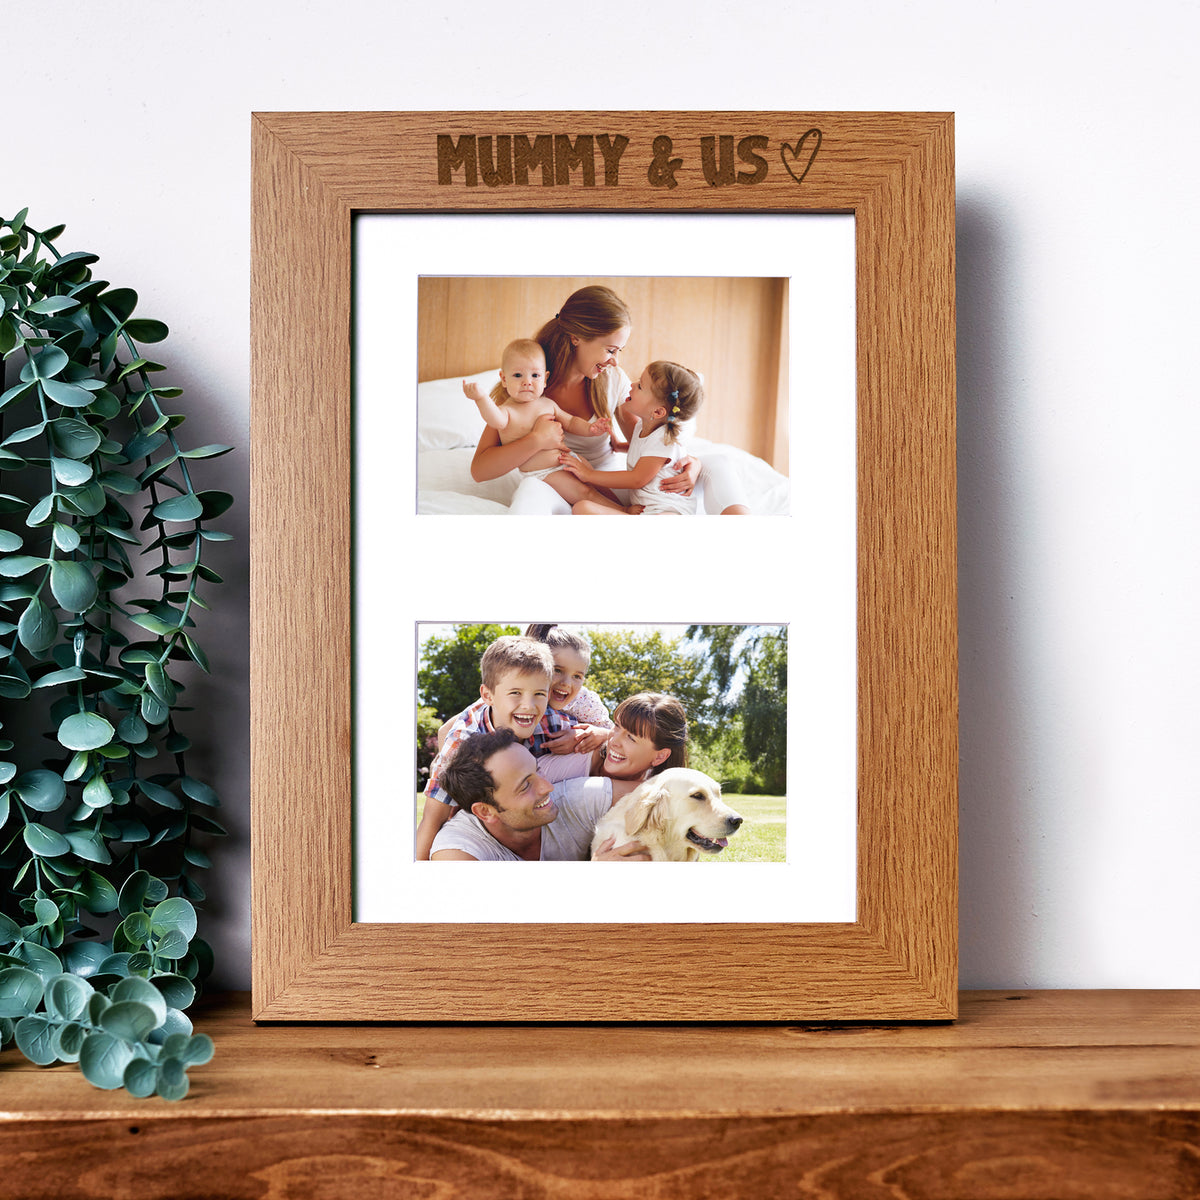 Mummy and Us Photo Picture Frame Double 6x4 Inch Landscape